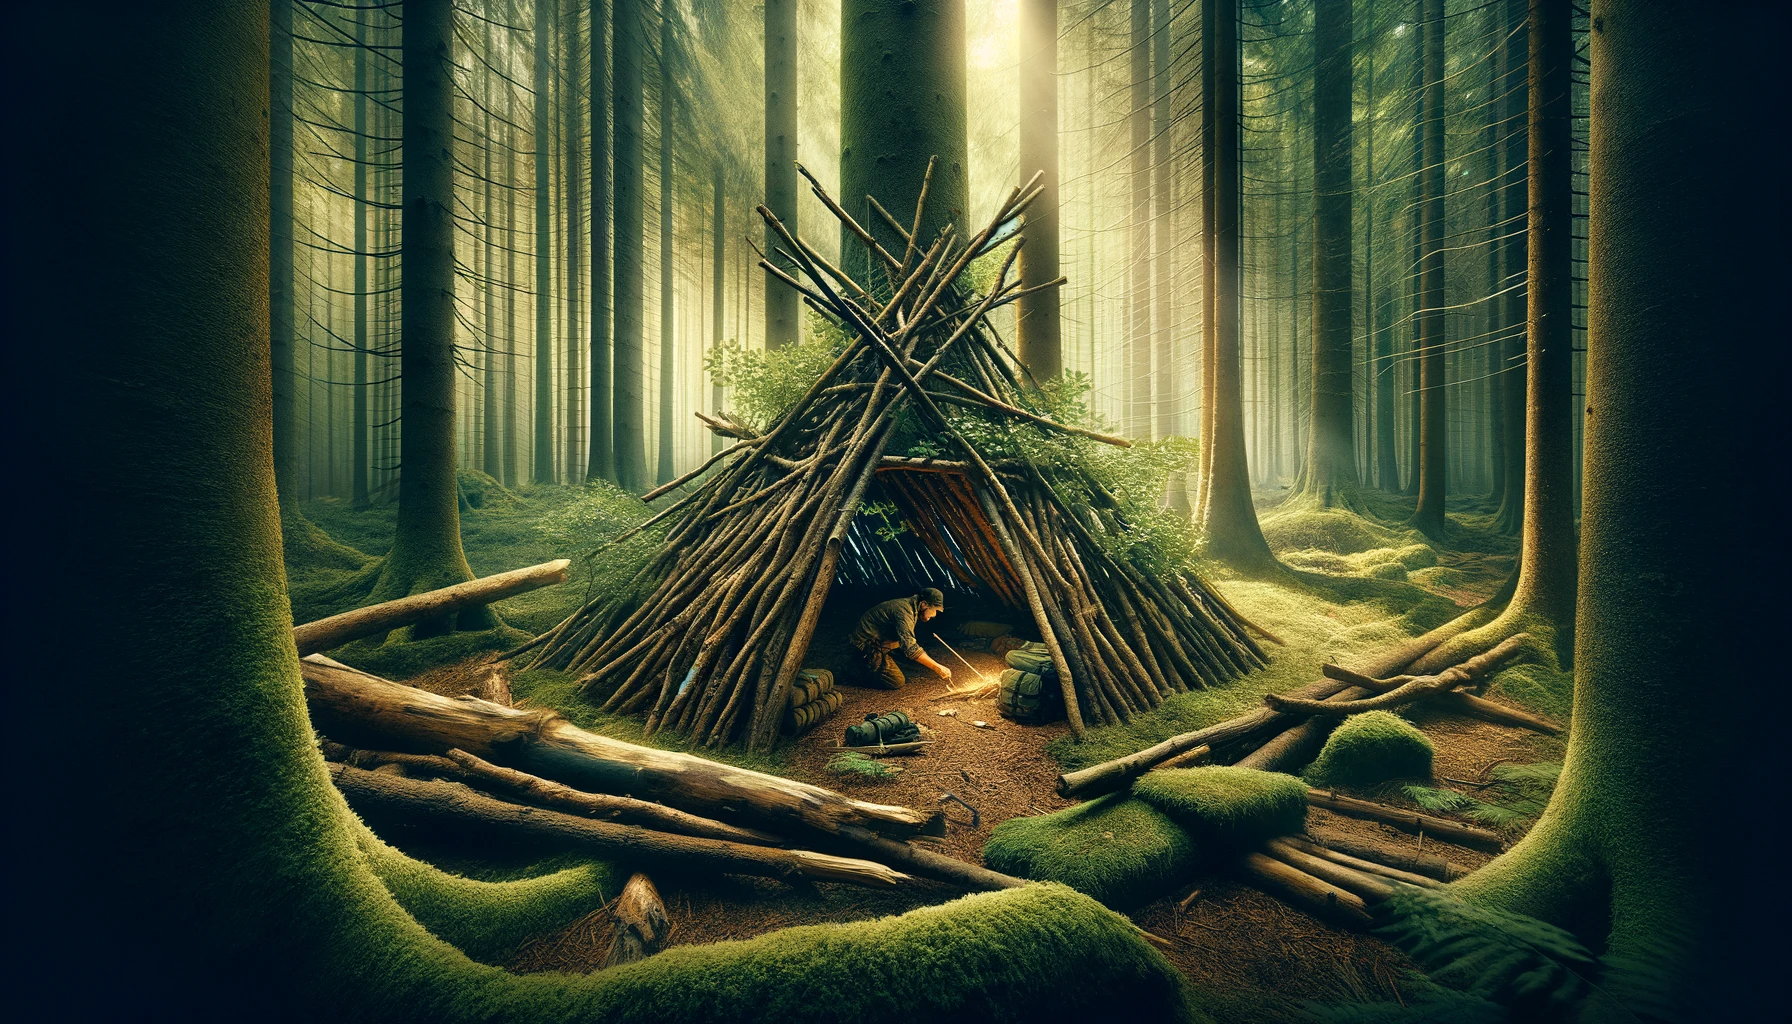 An engaging and detailed scene depicting the construction of a bushcraft shelter using natural materials in a dense, lush forest. The shelter, being skillfully crafted from branches, leaves, and vines, demonstrates the concept of harmony with nature and highlights the importance of self-sufficiency and utilizing the environment for survival. The image captures the essence of wilderness survival and bushcraft skills.